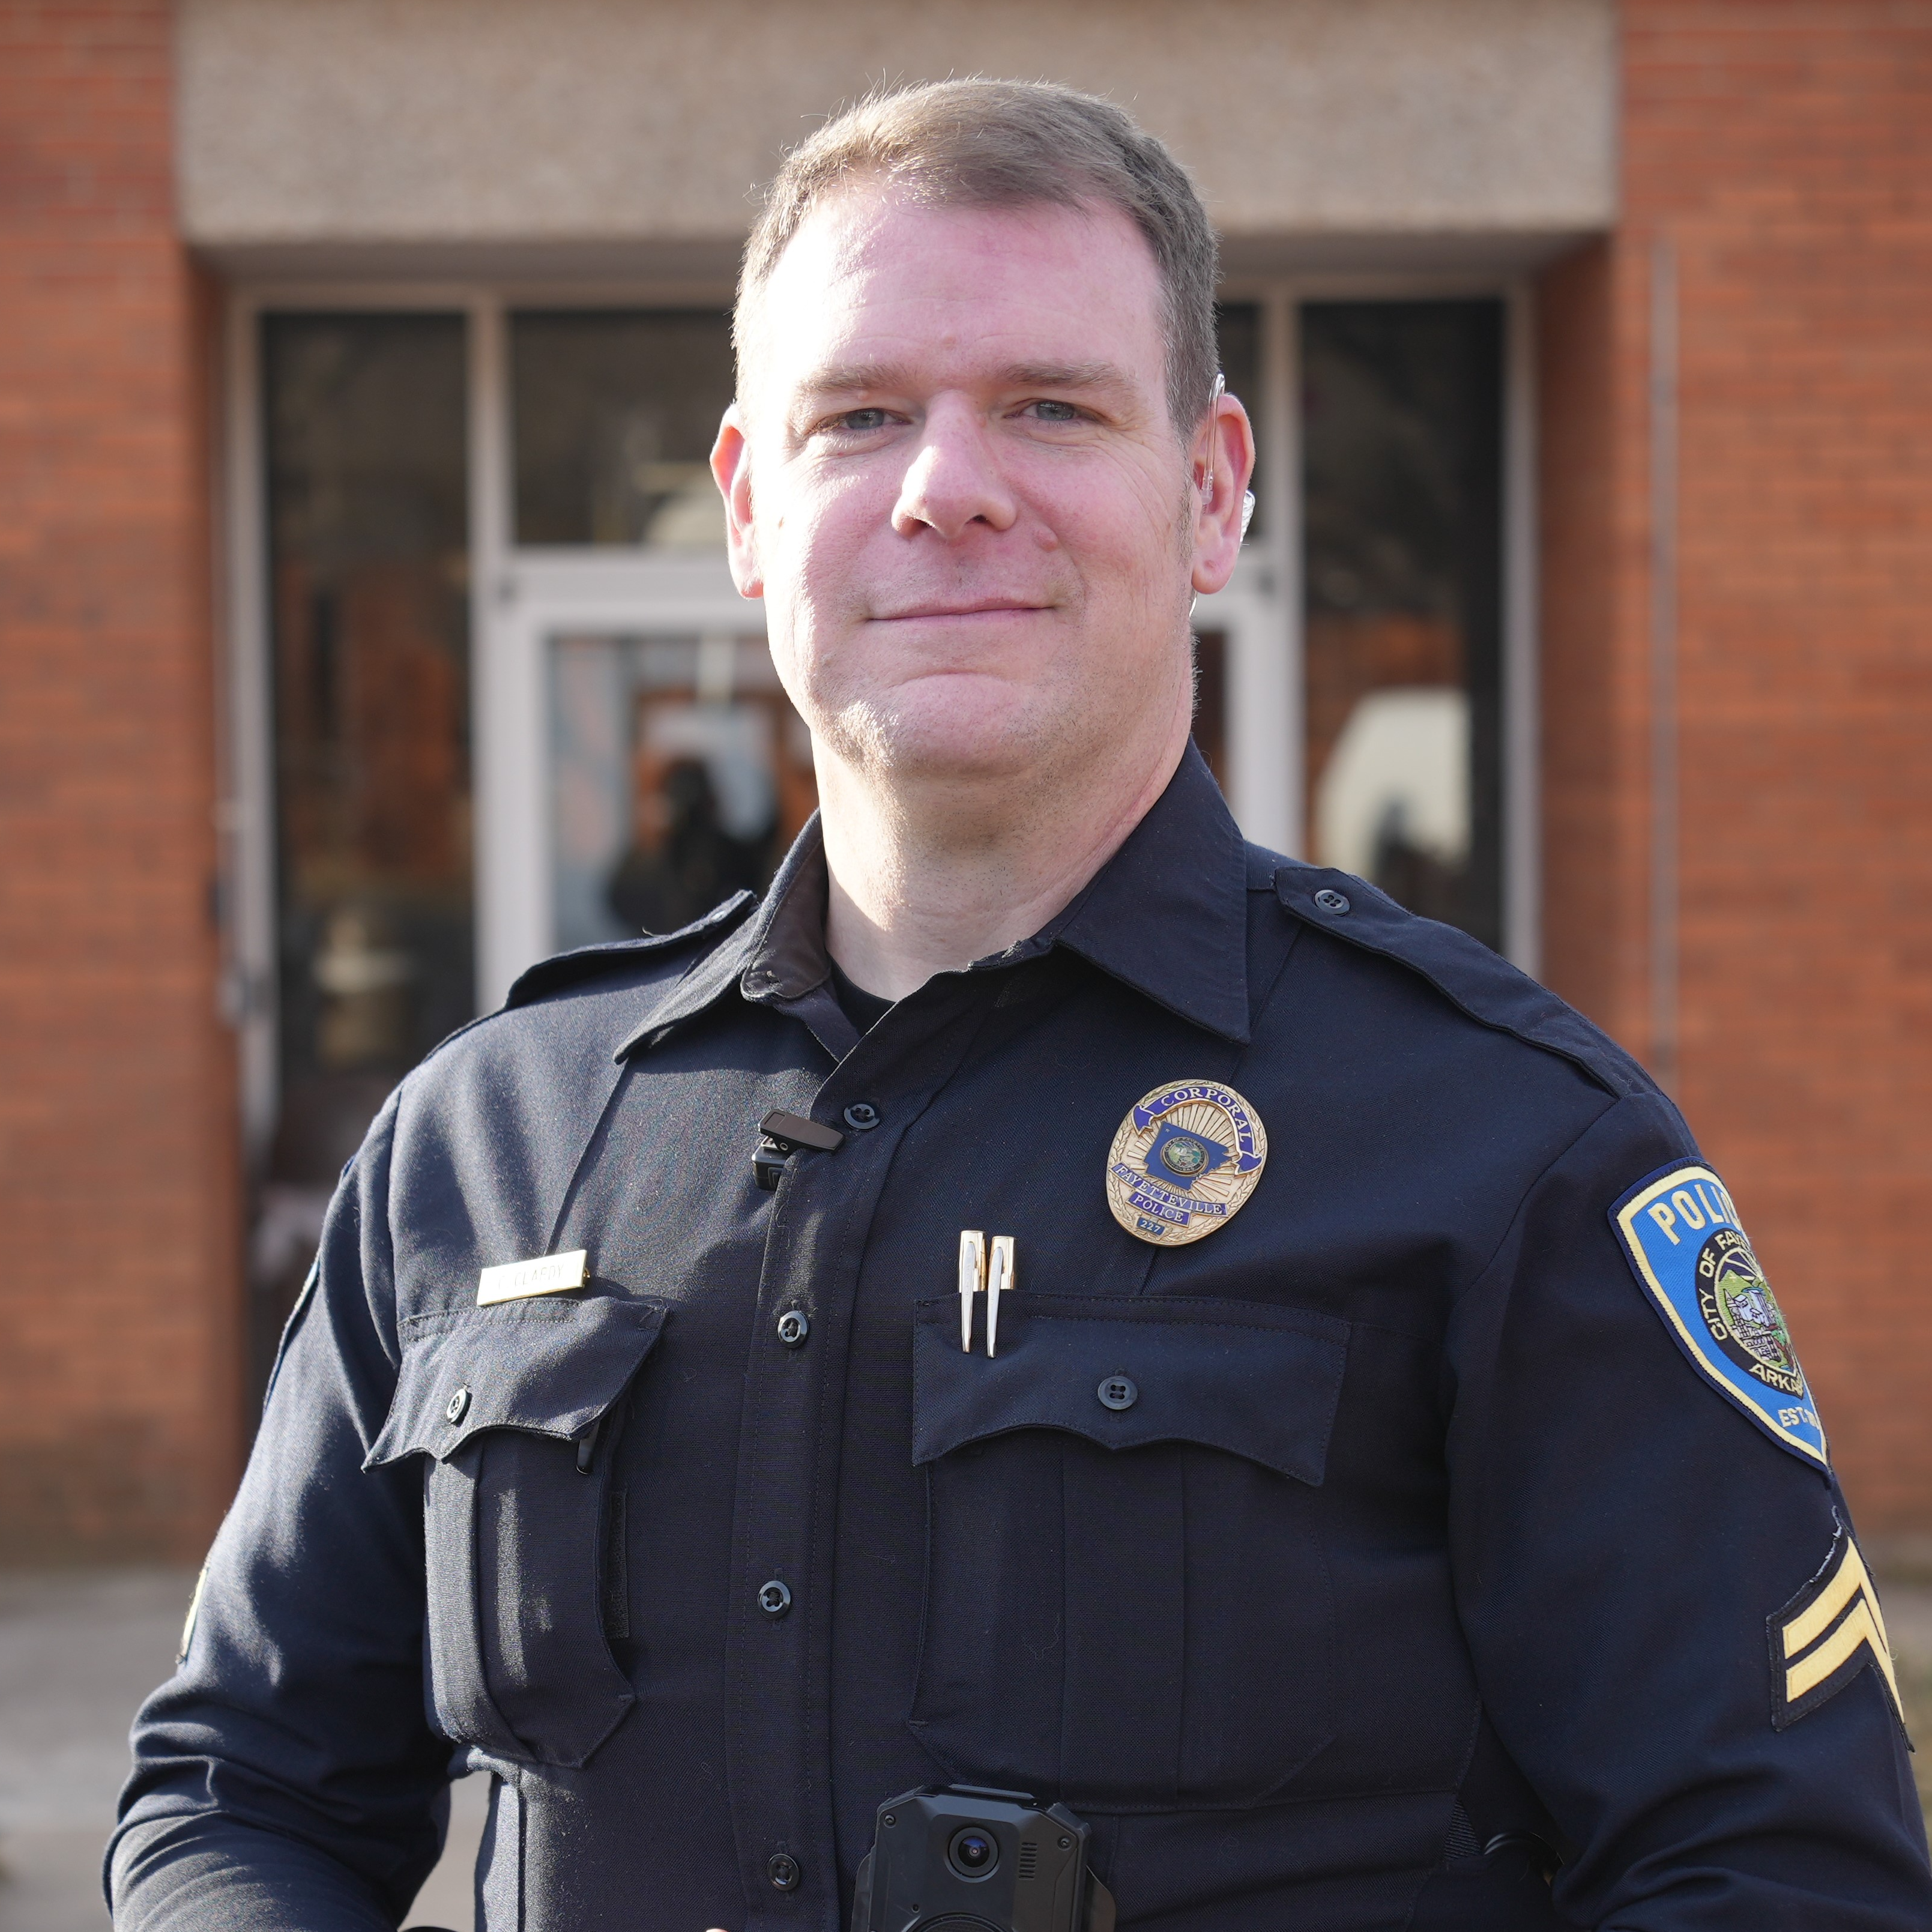 Meet Corporal Chris Clardy! Cpl. Clardy is our Student Resource Officer (SRO) at Allps School of Innovation and assists with coverage at Owl Creek School, Ramay Junior High School, and Fayetteville High School. 